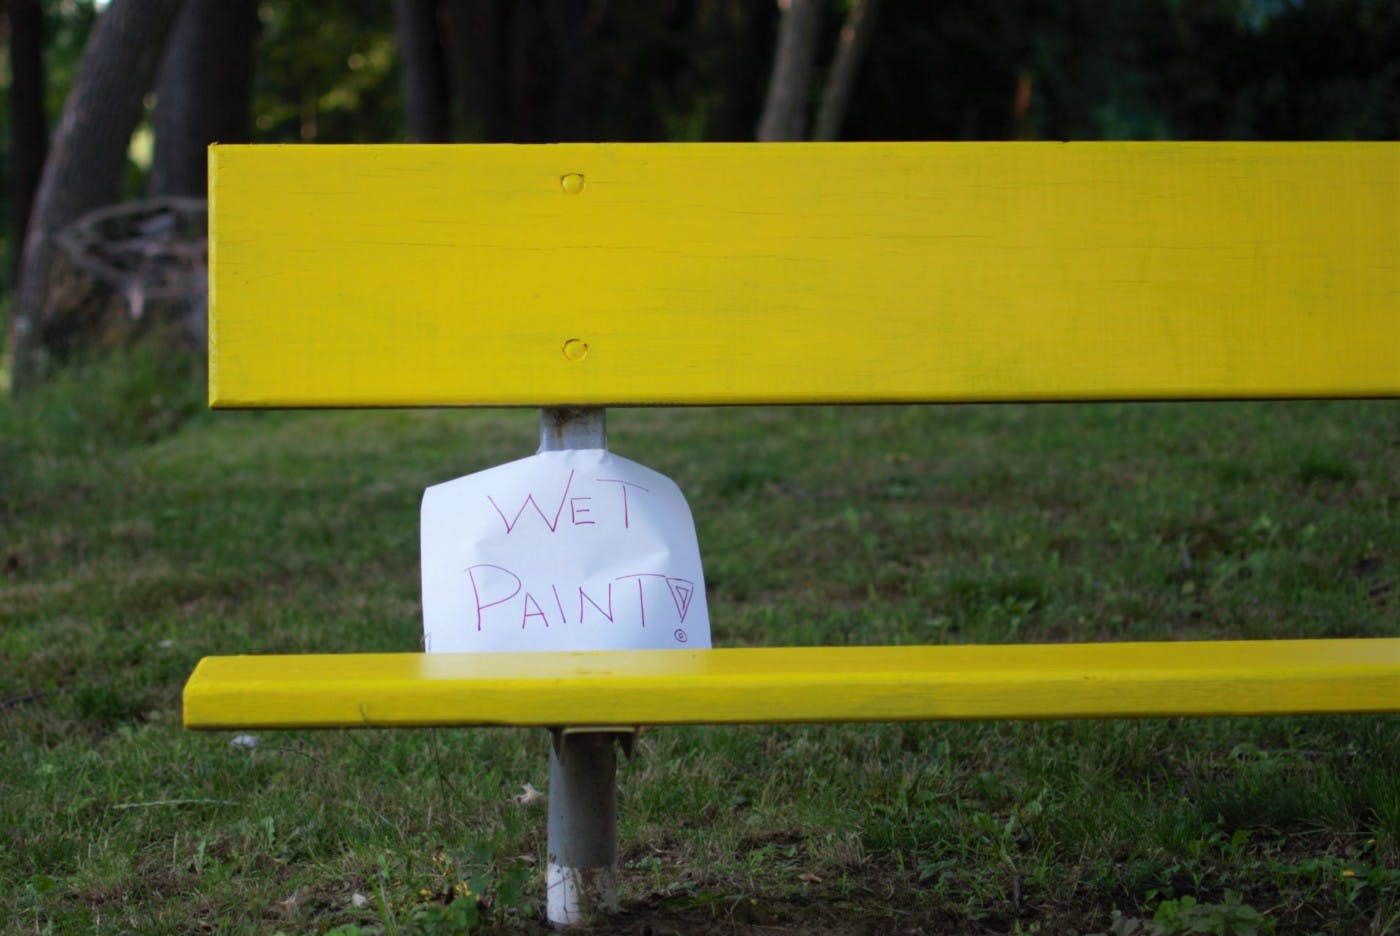 hand-written note that says "wet paint" on a yellow bench in a grassy field